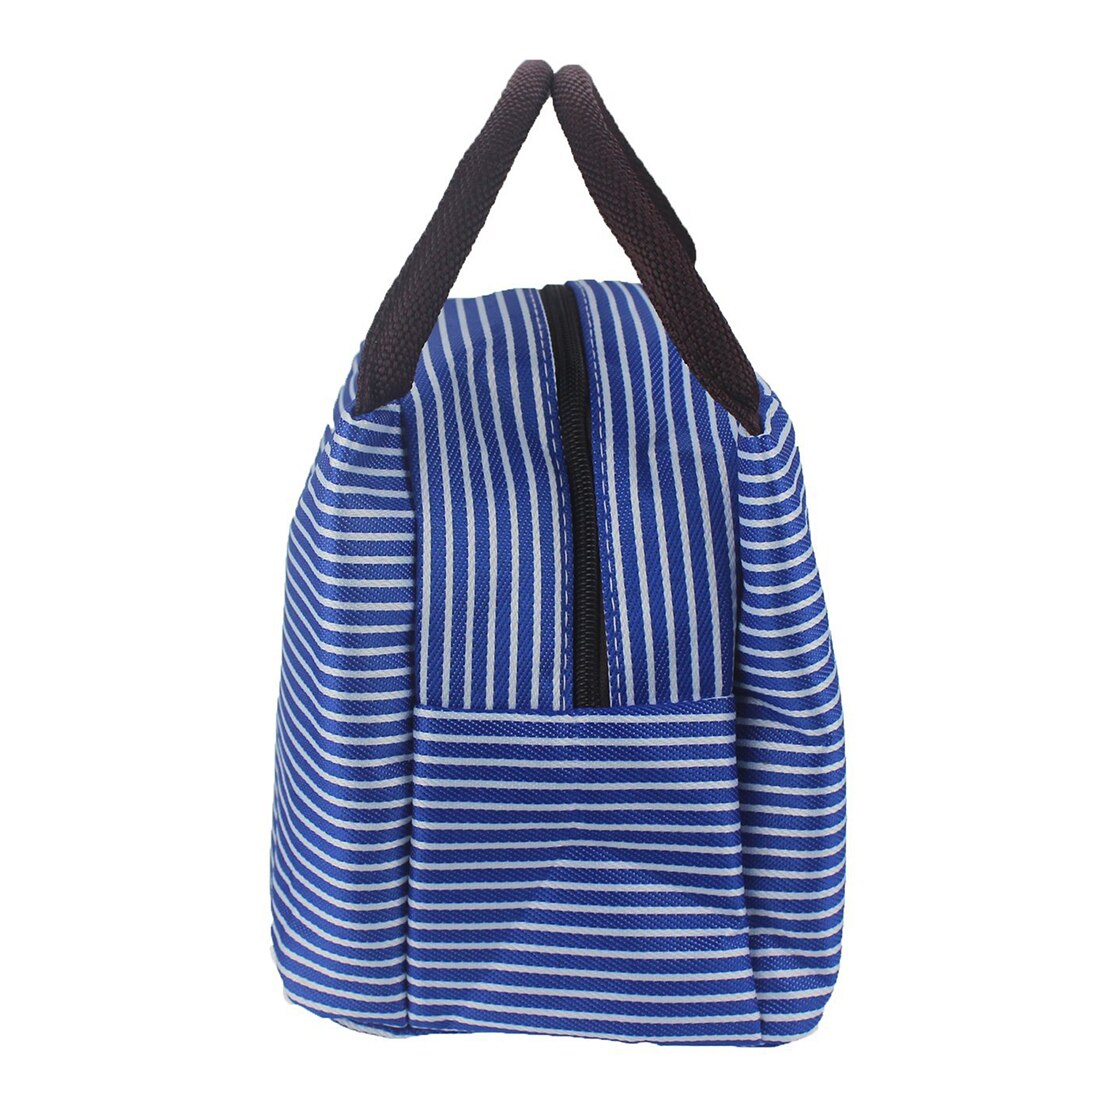 Portable Lunch Bag New Stripe Cooler Bag Thermal Insulation Bags Travel Picnic Food Lunch box bag for Women Girls Kids - ebowsos